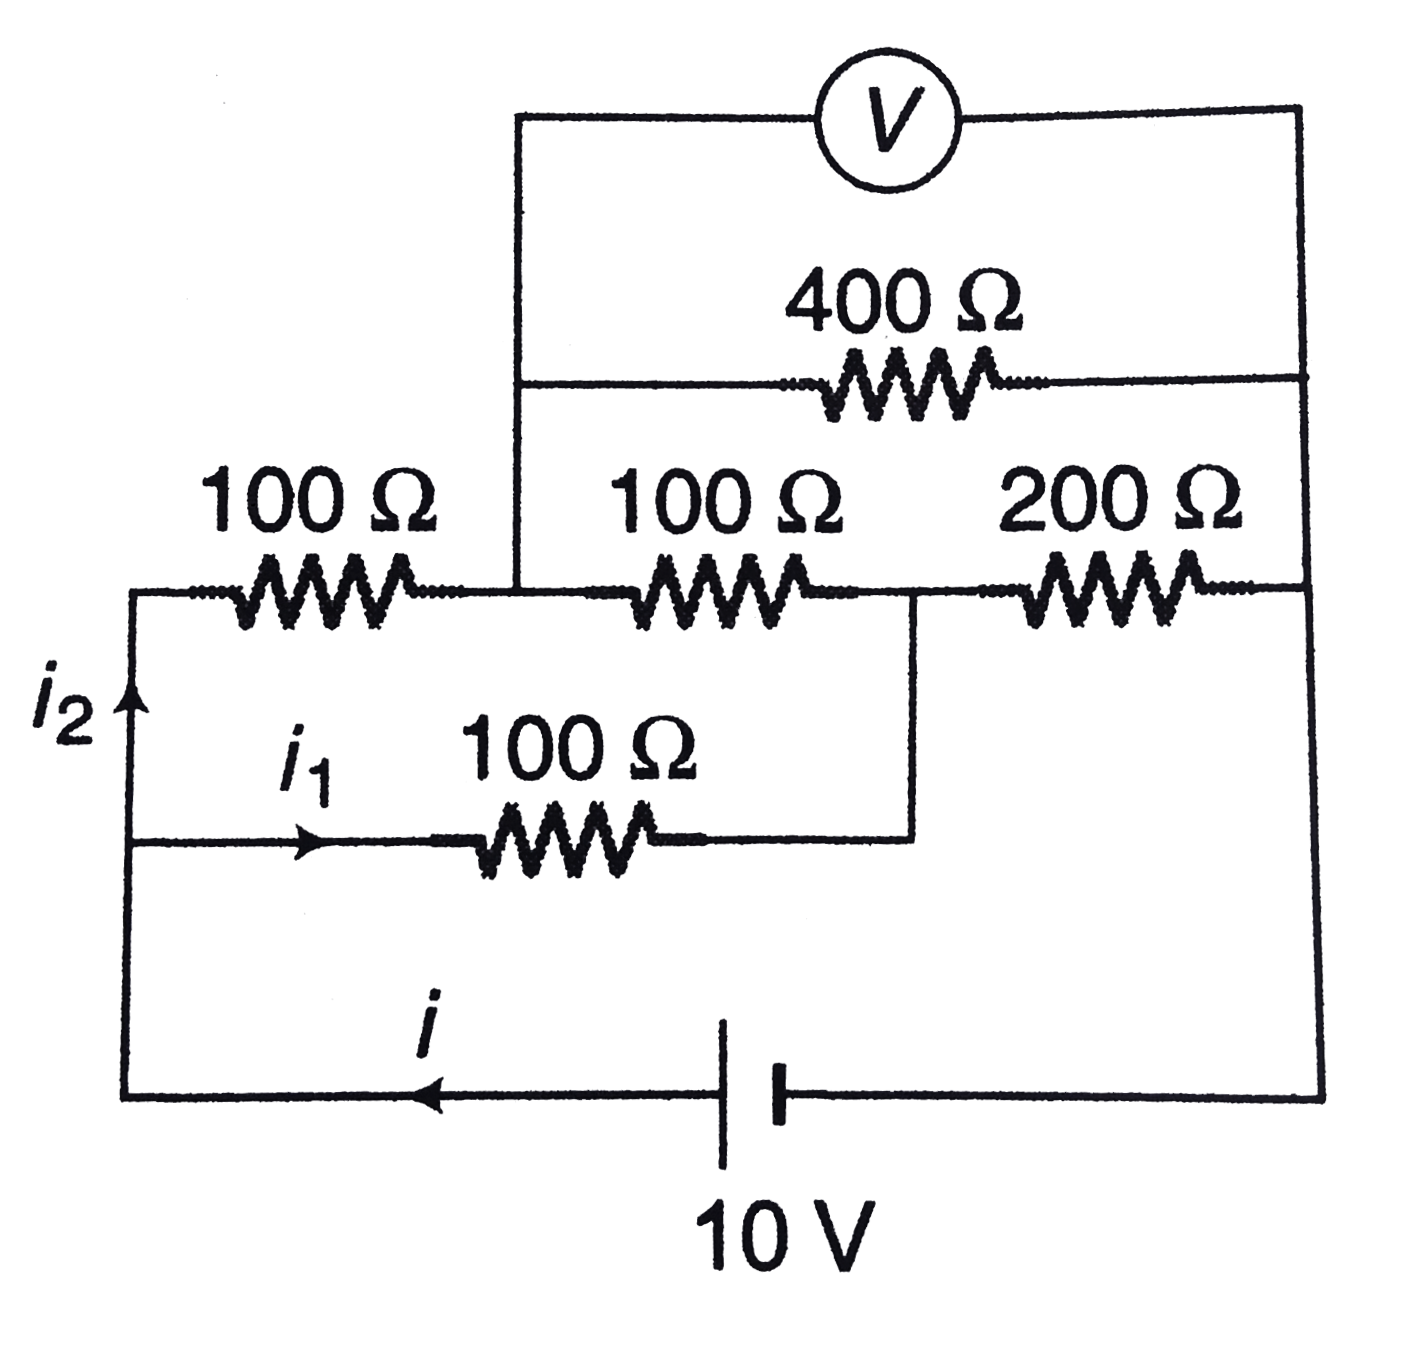 An Electrical Circuit Is Shown In Figure Calculate The Potential Difference Across The Resistor Of 400 Omega As Will Be Measured By The Voltmeter Vof Resistance 400 Omega Either By Applying Kirchhoff S